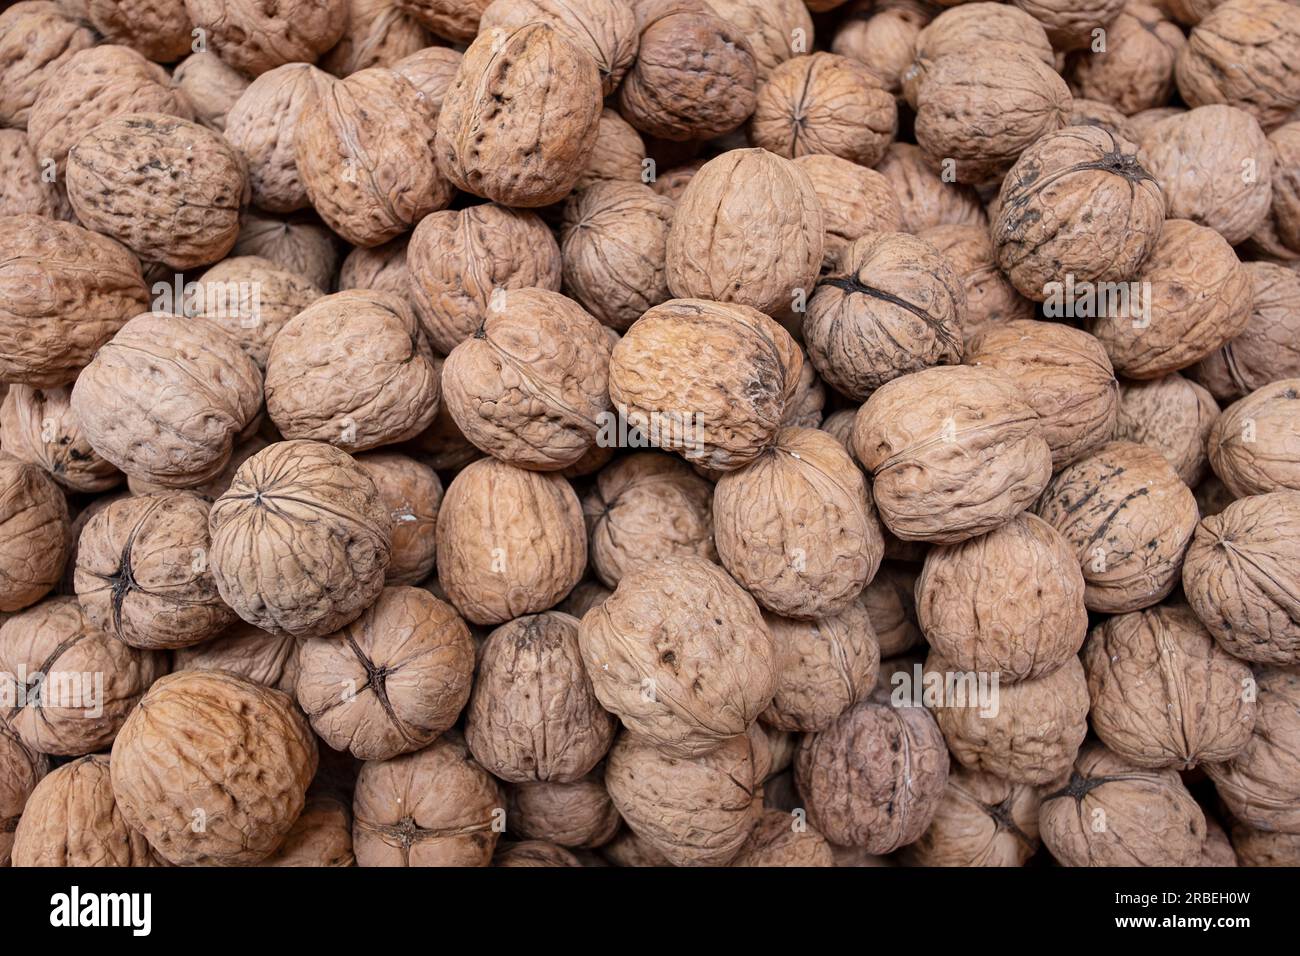 Large pile of vibrant walnuts in shells, delicious dry nuts popular for their nutrient-rich kernels and used in a variety of dishes Stock Photo